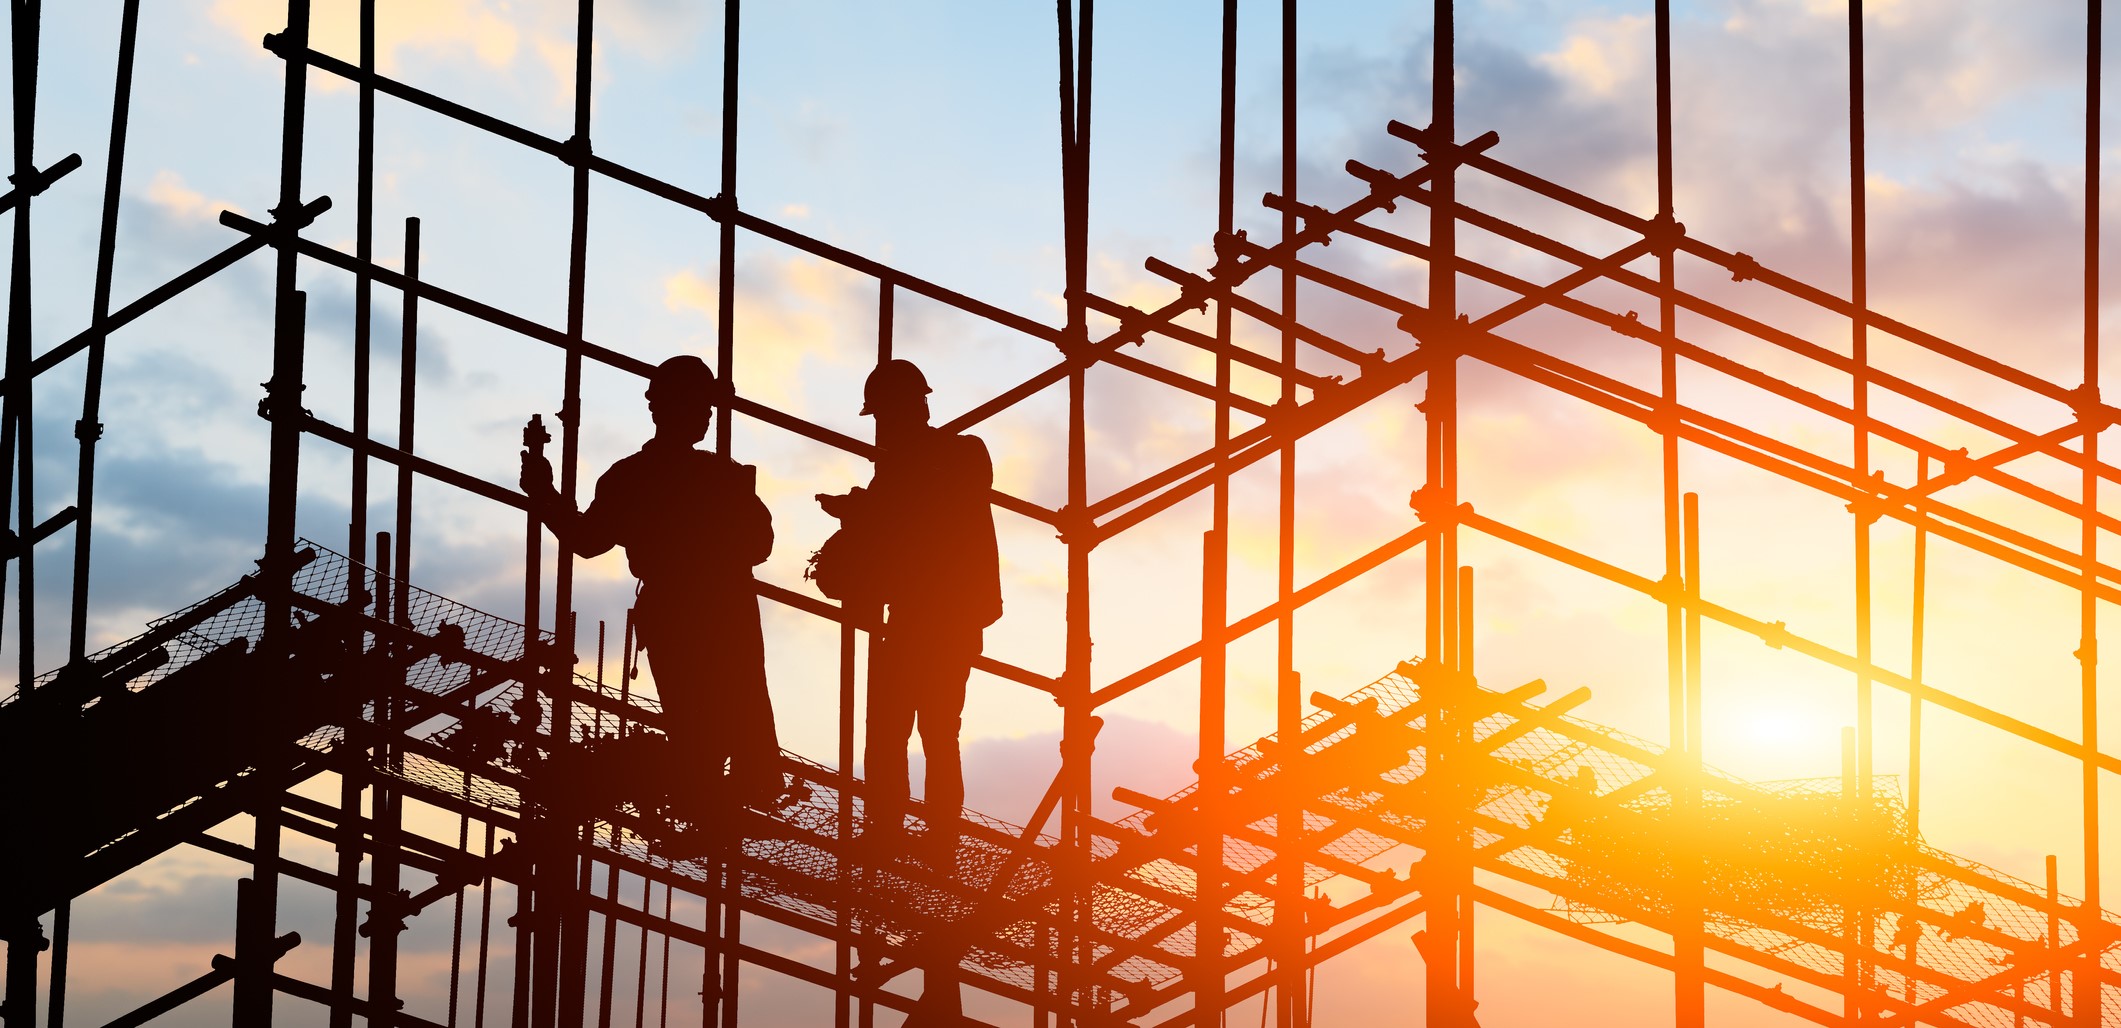 Silhouettes of two construction workers standing on scaffolding at sunset 